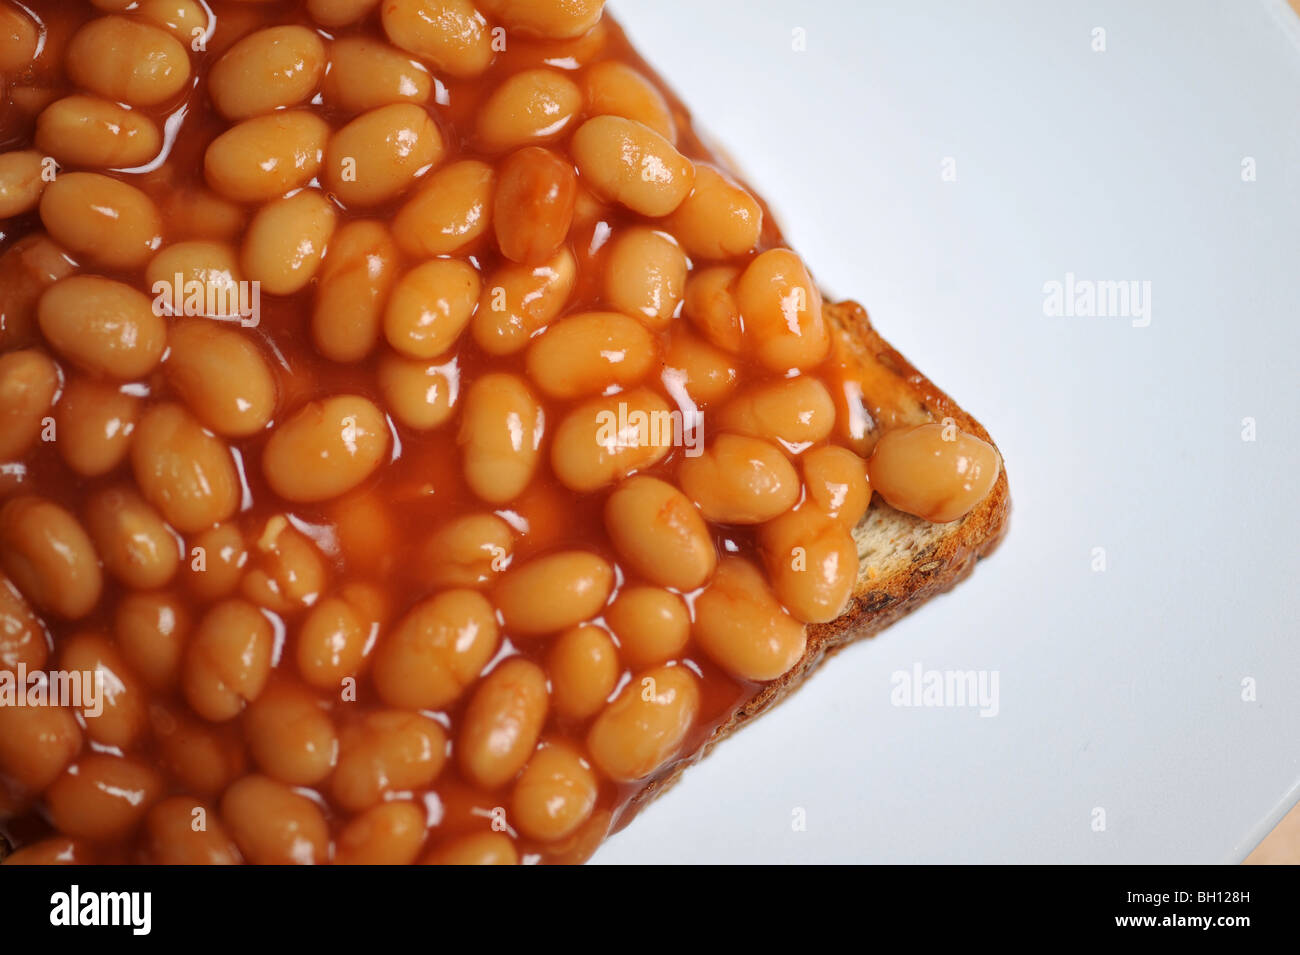 A British favourite lunch time meal, a plate of beans on toast. Stock Photo